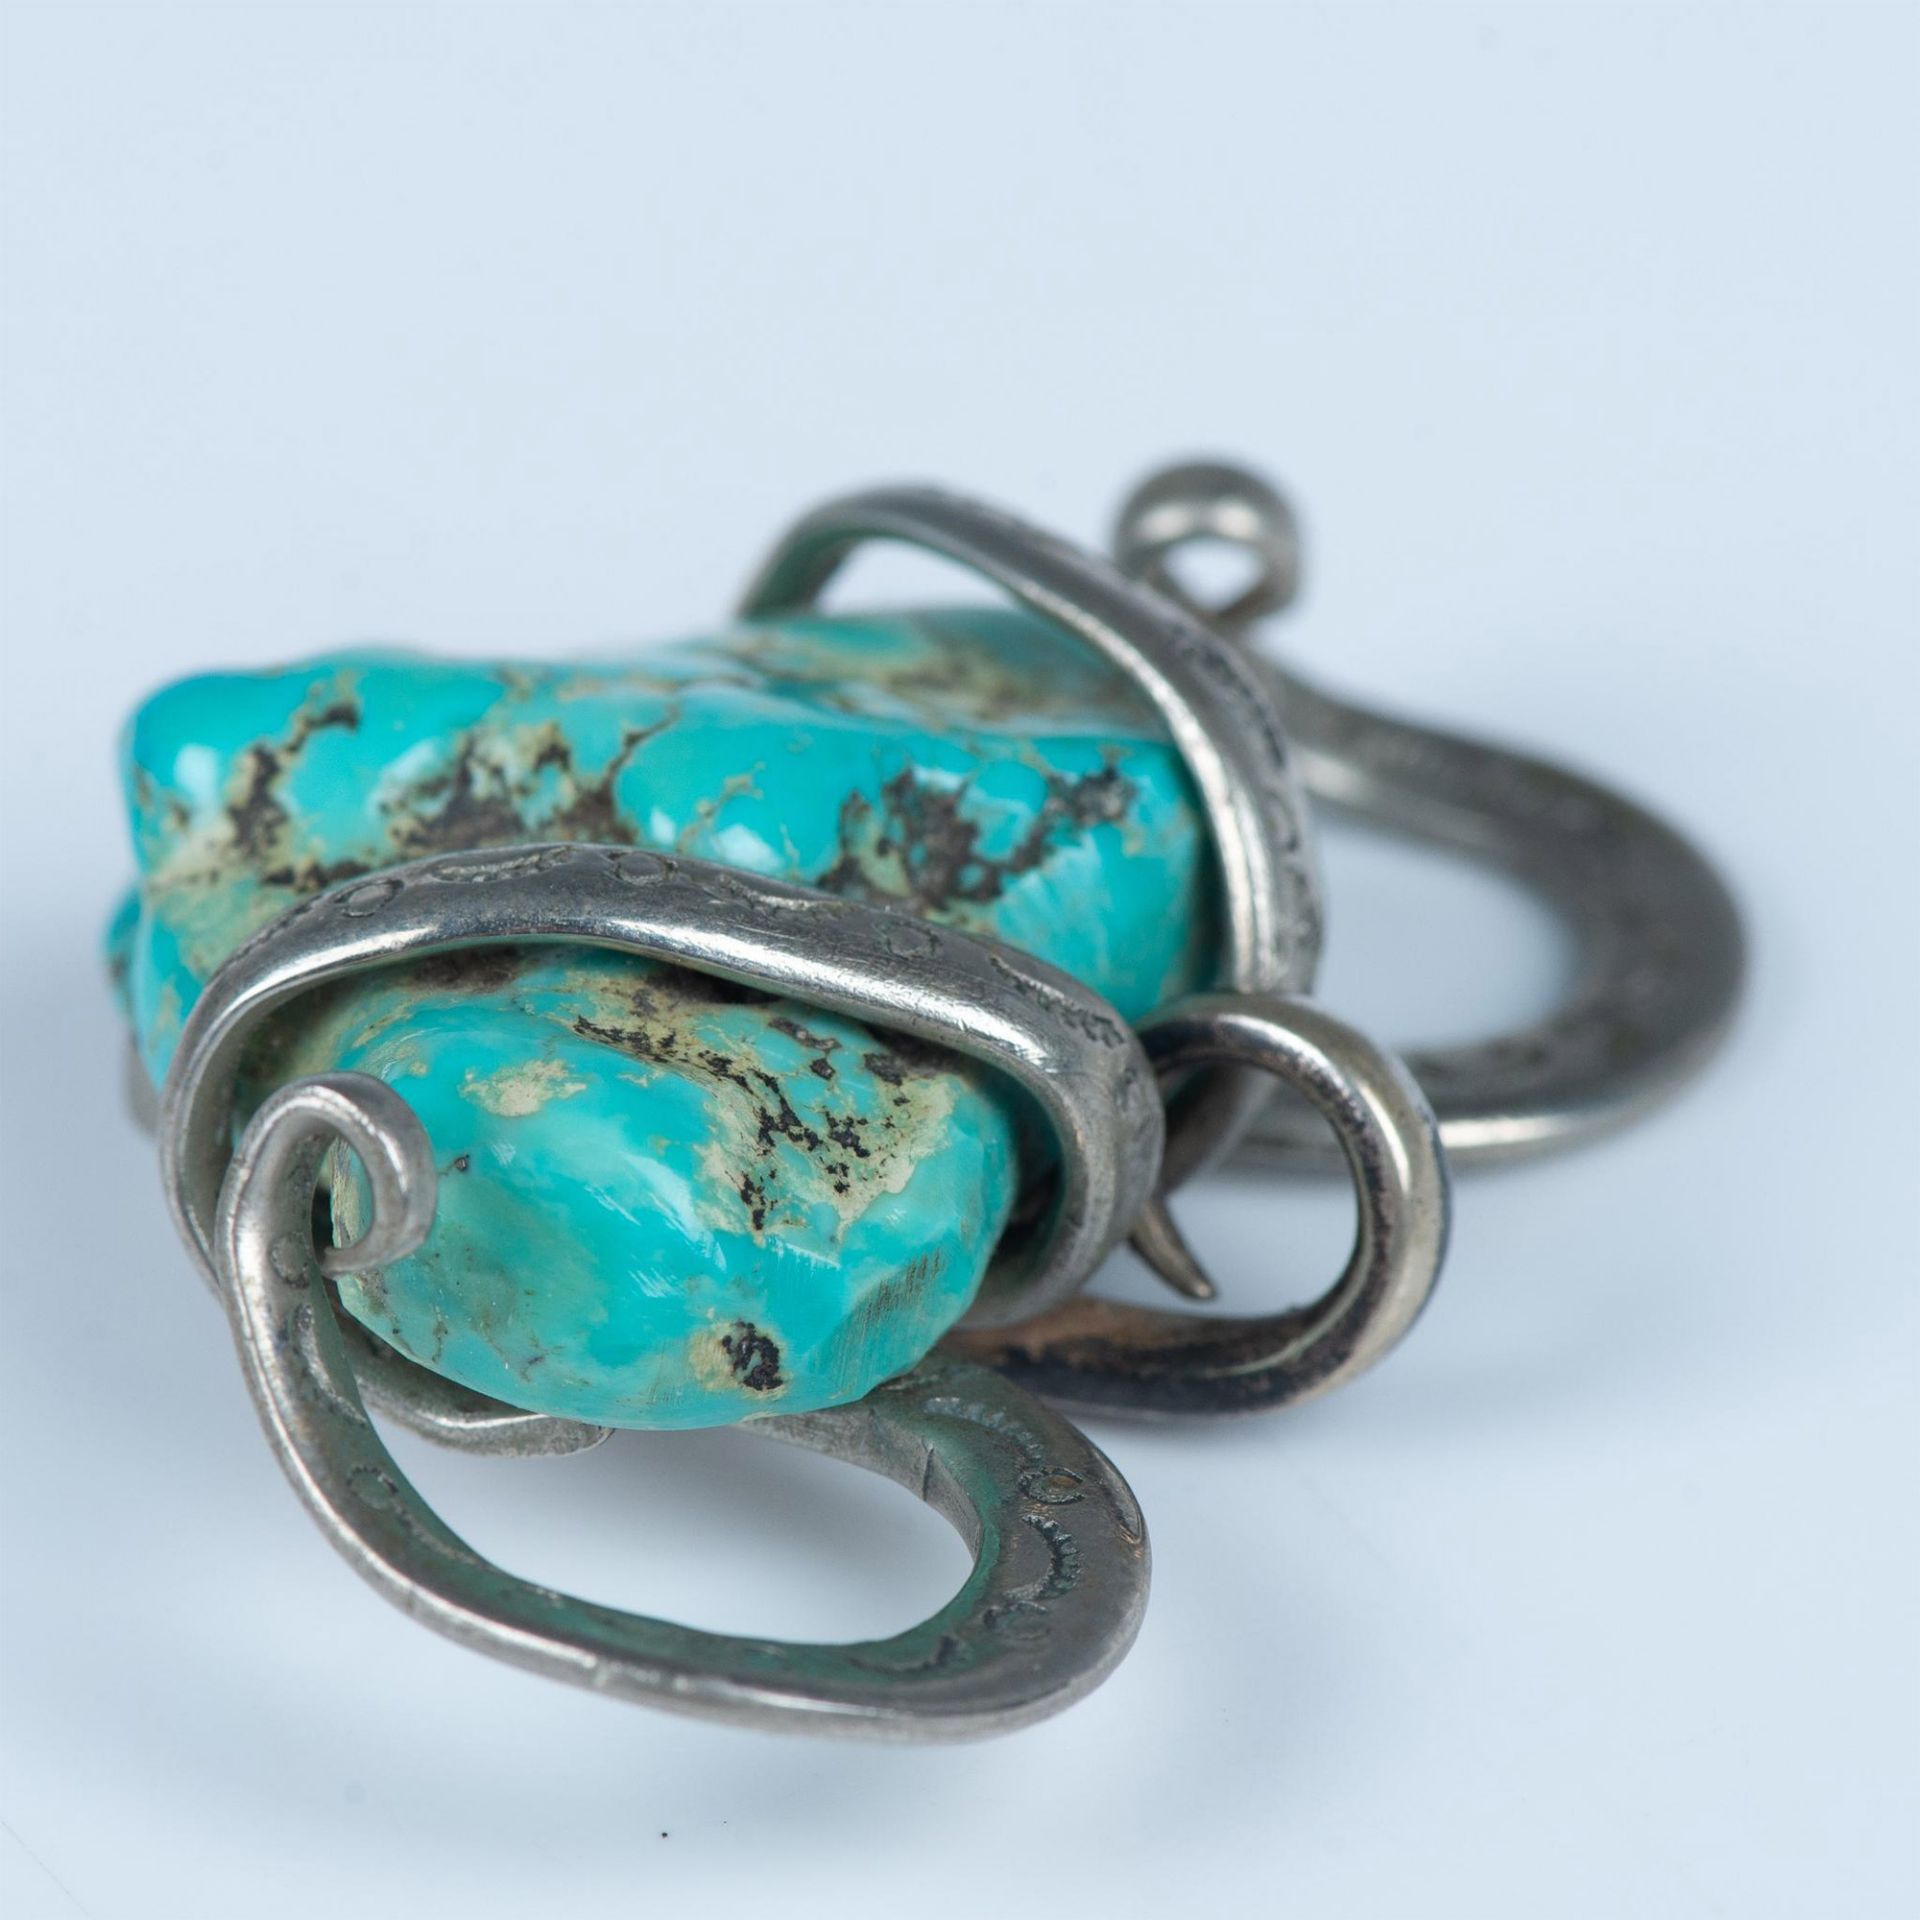 Handmade Sterling & Turquoise Nugget Horned Animal Pendant - Image 3 of 3